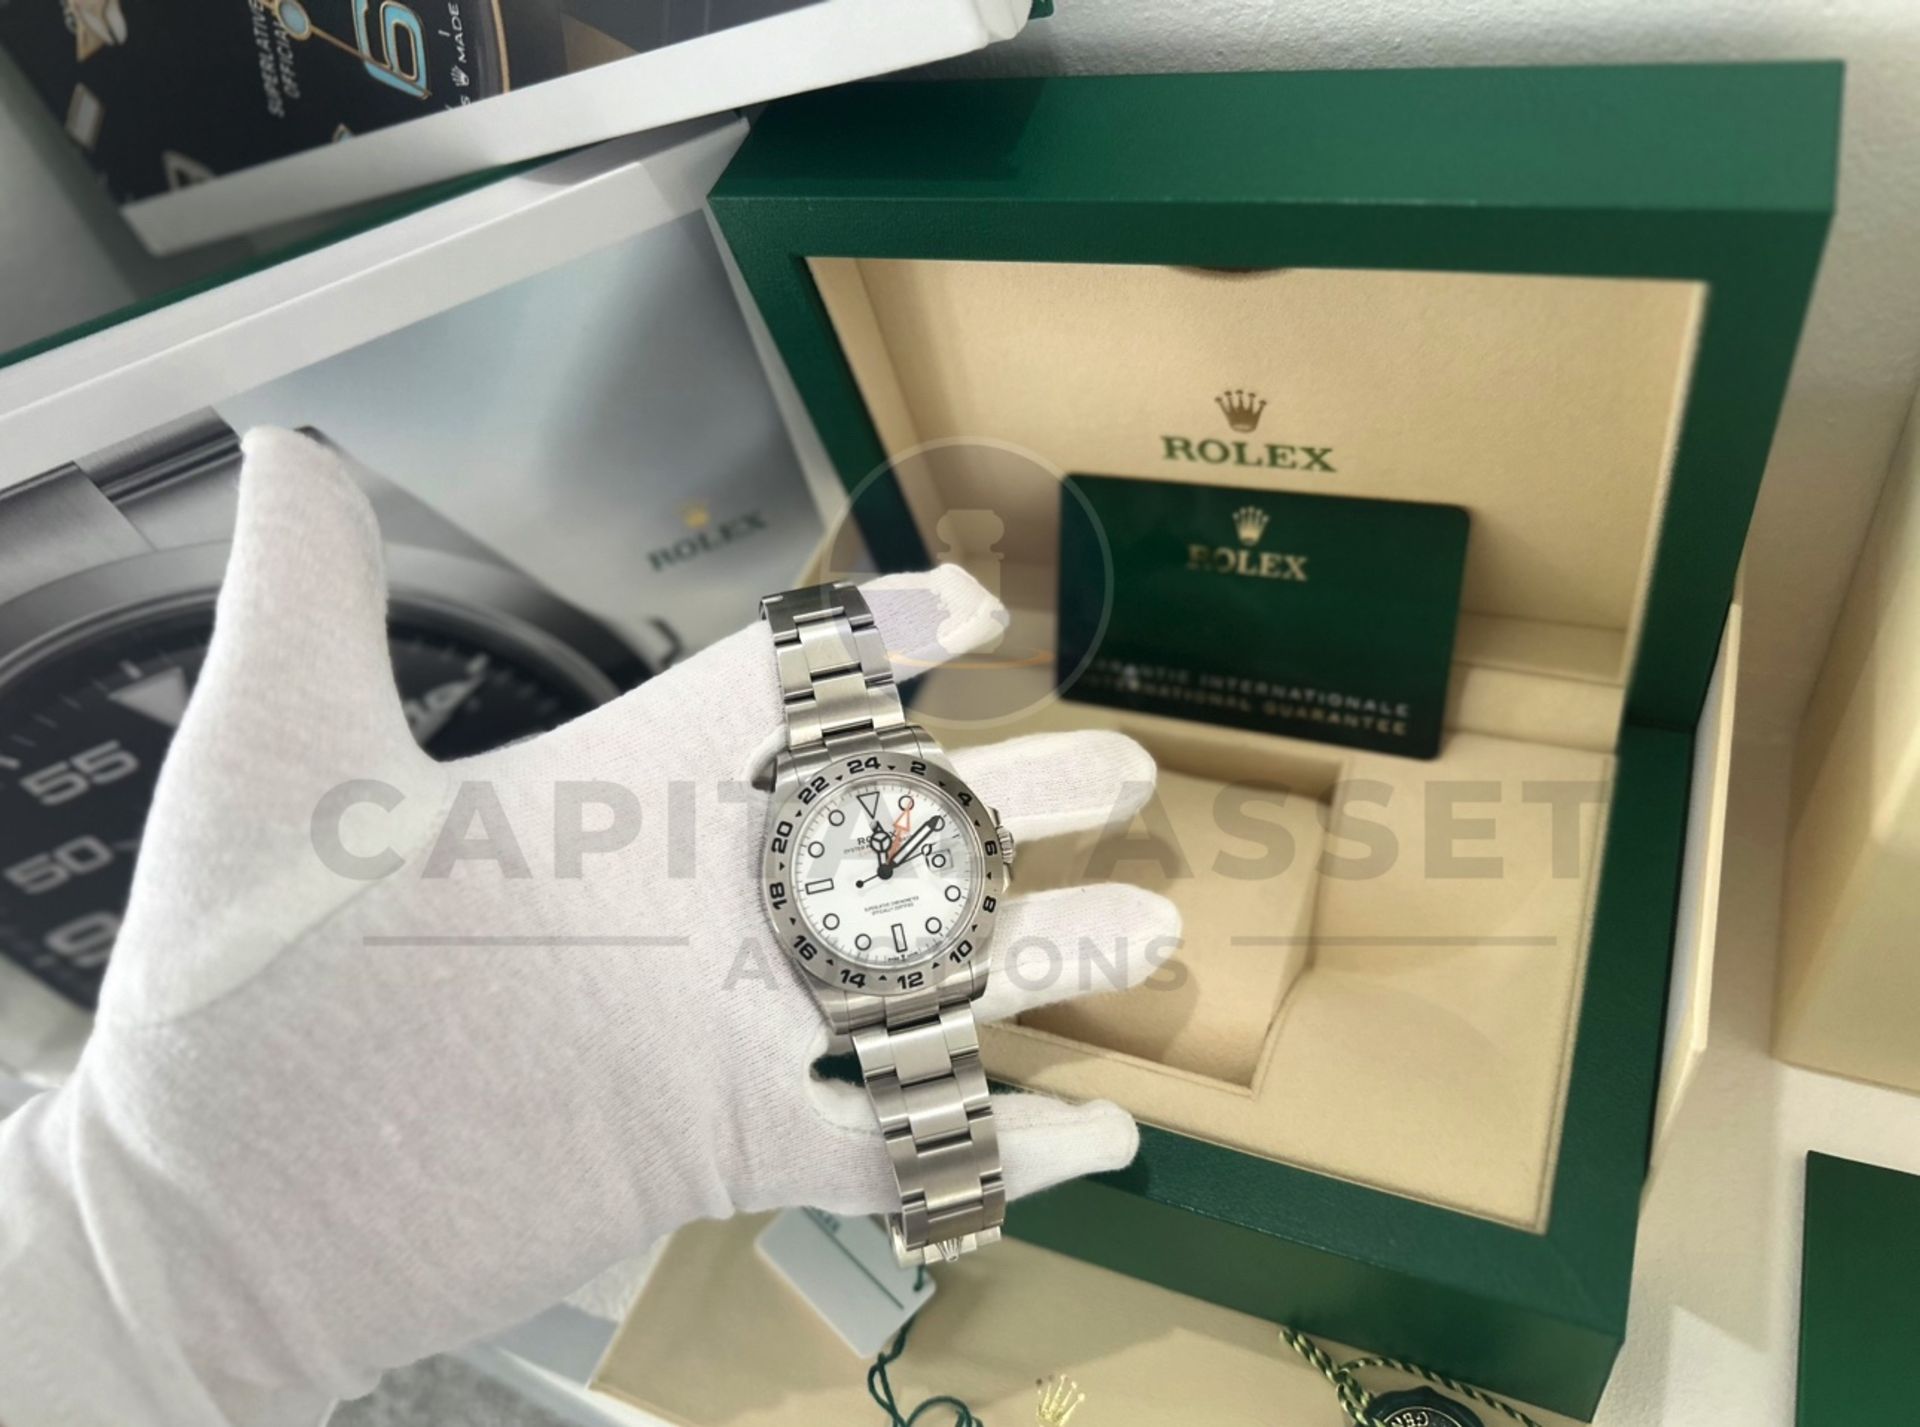 ROLEX EXPLORER II *POLAR - 42MM WHITE DIAL* (MARCH 2022) OYSTER STEEL *SPORTS MODEL* (BEAT THE WAIT) - Image 12 of 22